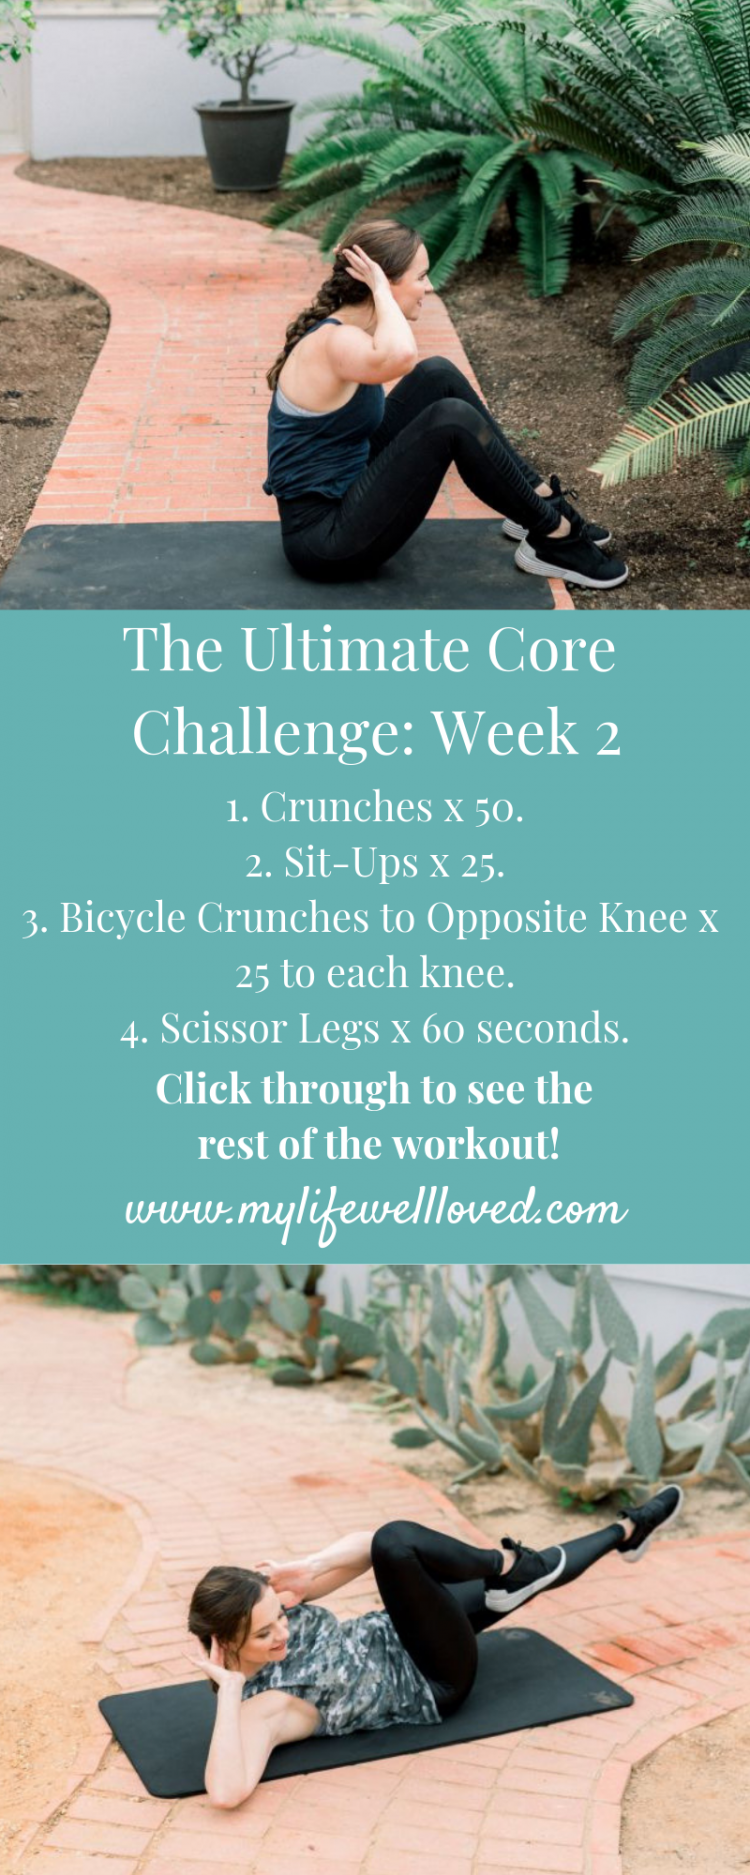 Health + fitness blogger, Heather Brown at My Life Well Loved shares her quick core challenge workout for tightening and strengthening abdominal muscles // #core #corechallenge #quickabworkout #diastasisrecti